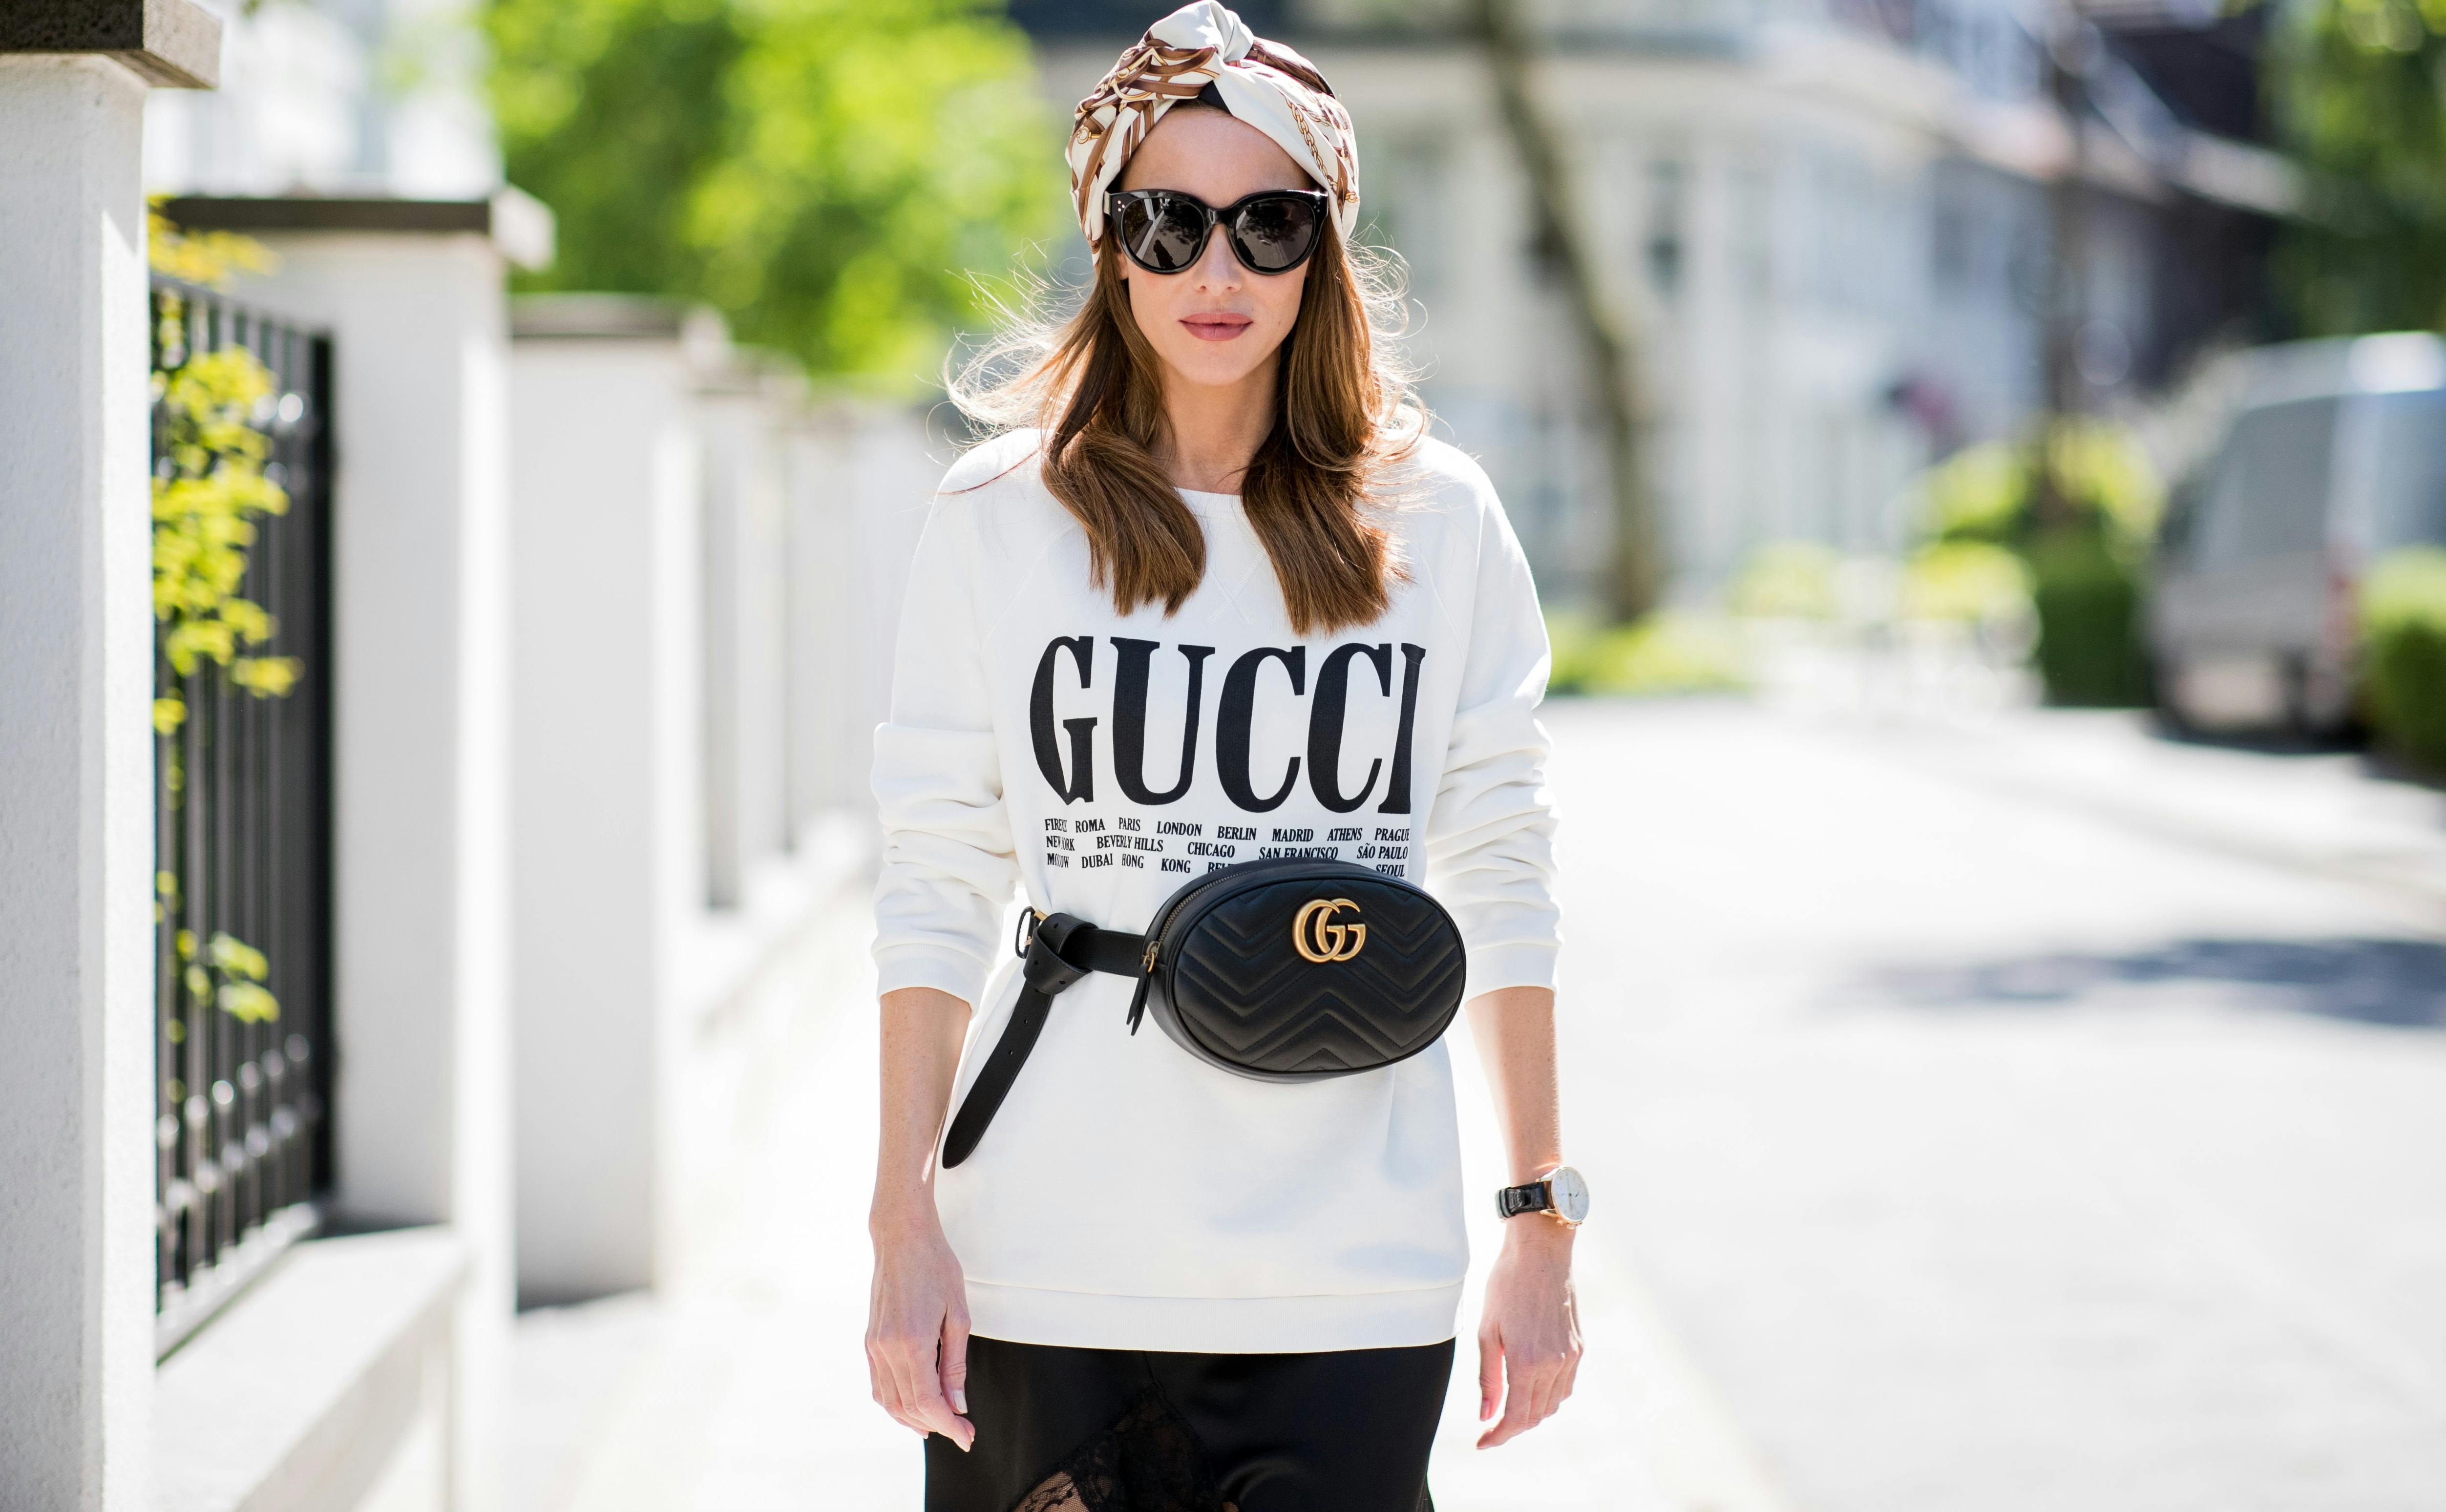 Alessandra Ambrosio's Gucci Belt Bag and Band Tee Look for Less